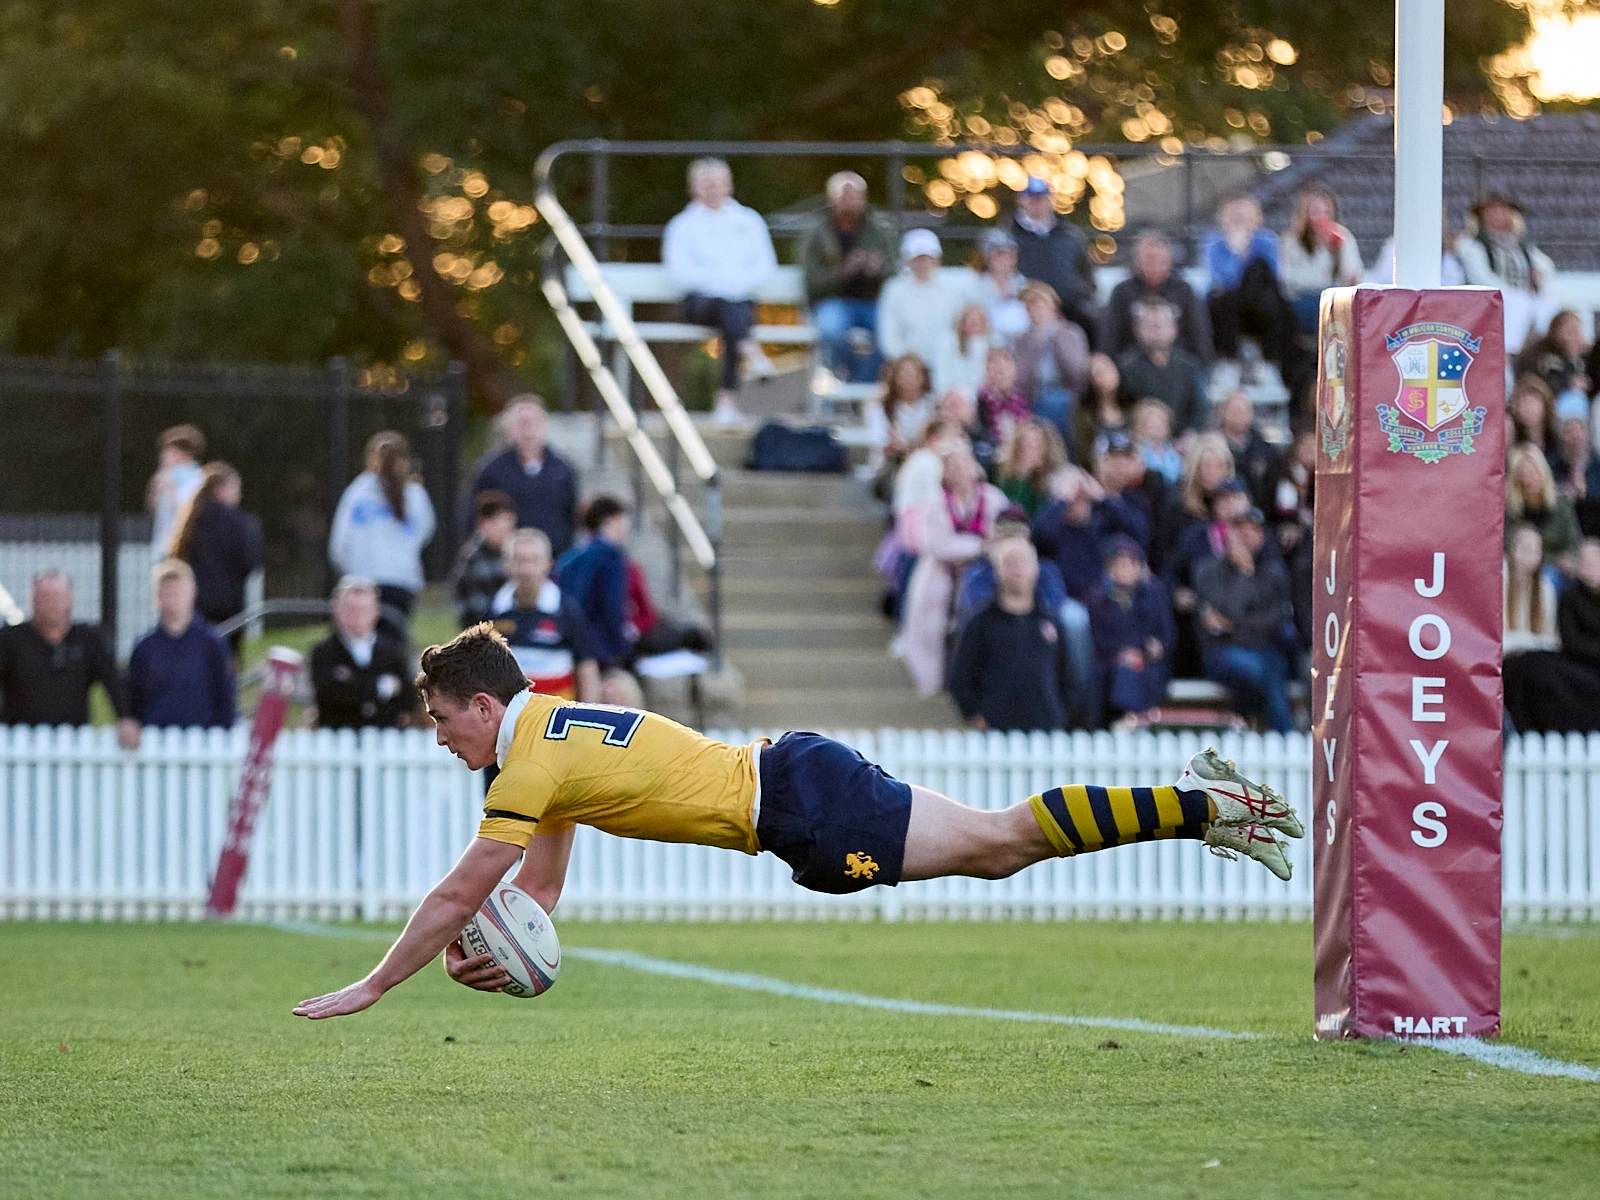 PWP - Scots College 1st XV rugby vs St Joseph's College, 20230617 0177